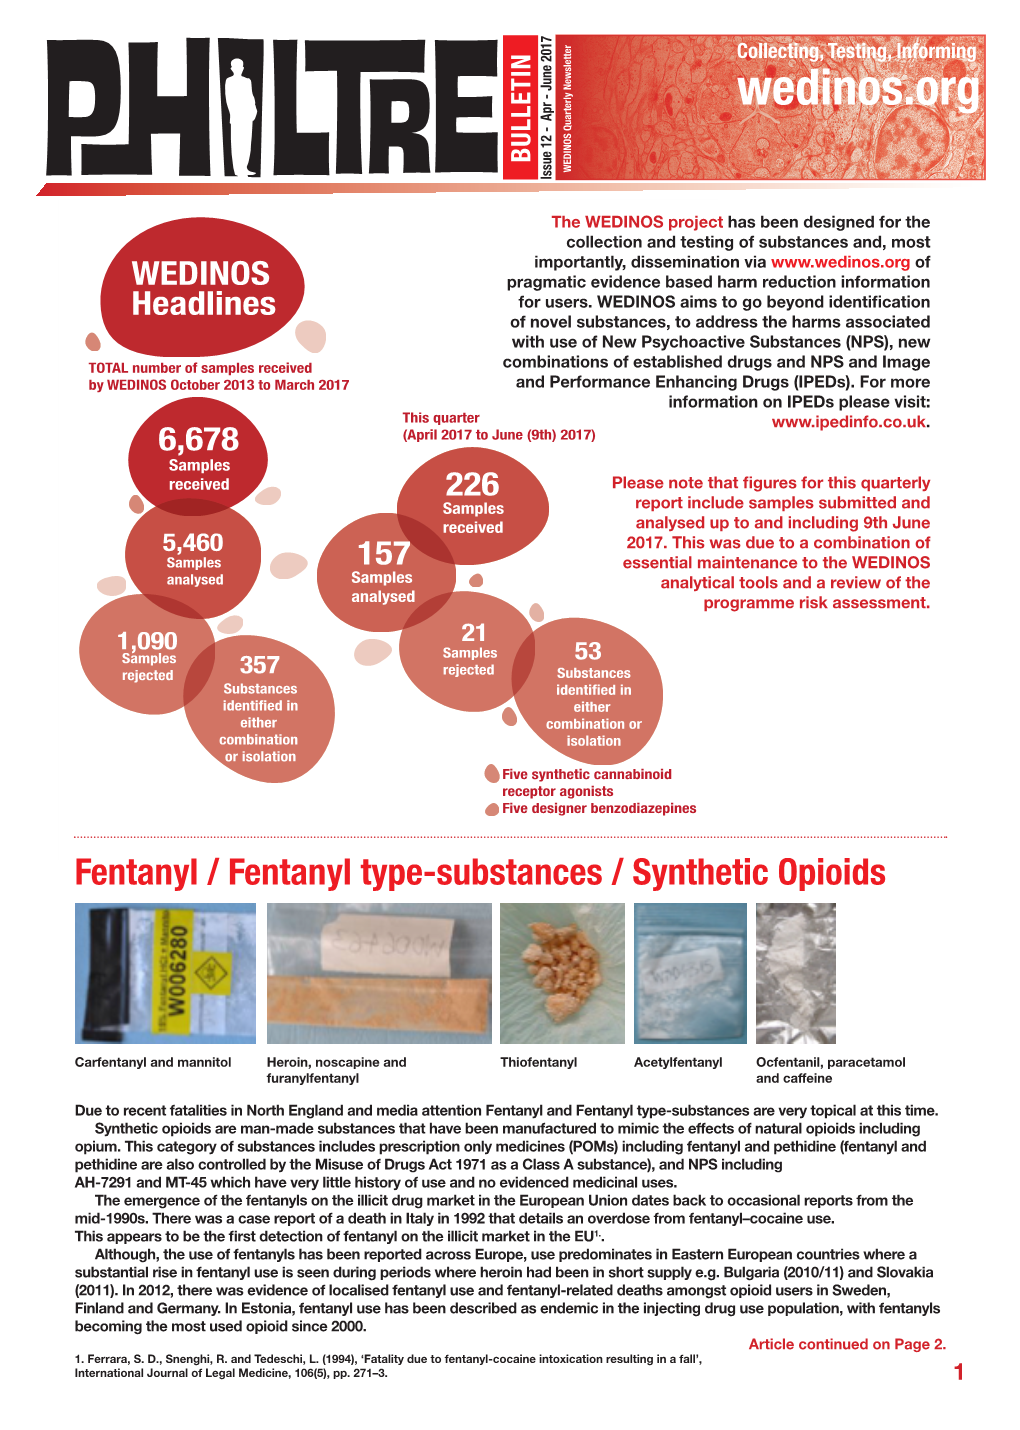 Issue 12 - Apr - June 2017 Identified in Substances Collection Andtestingofsubstancesand,Most Isolation